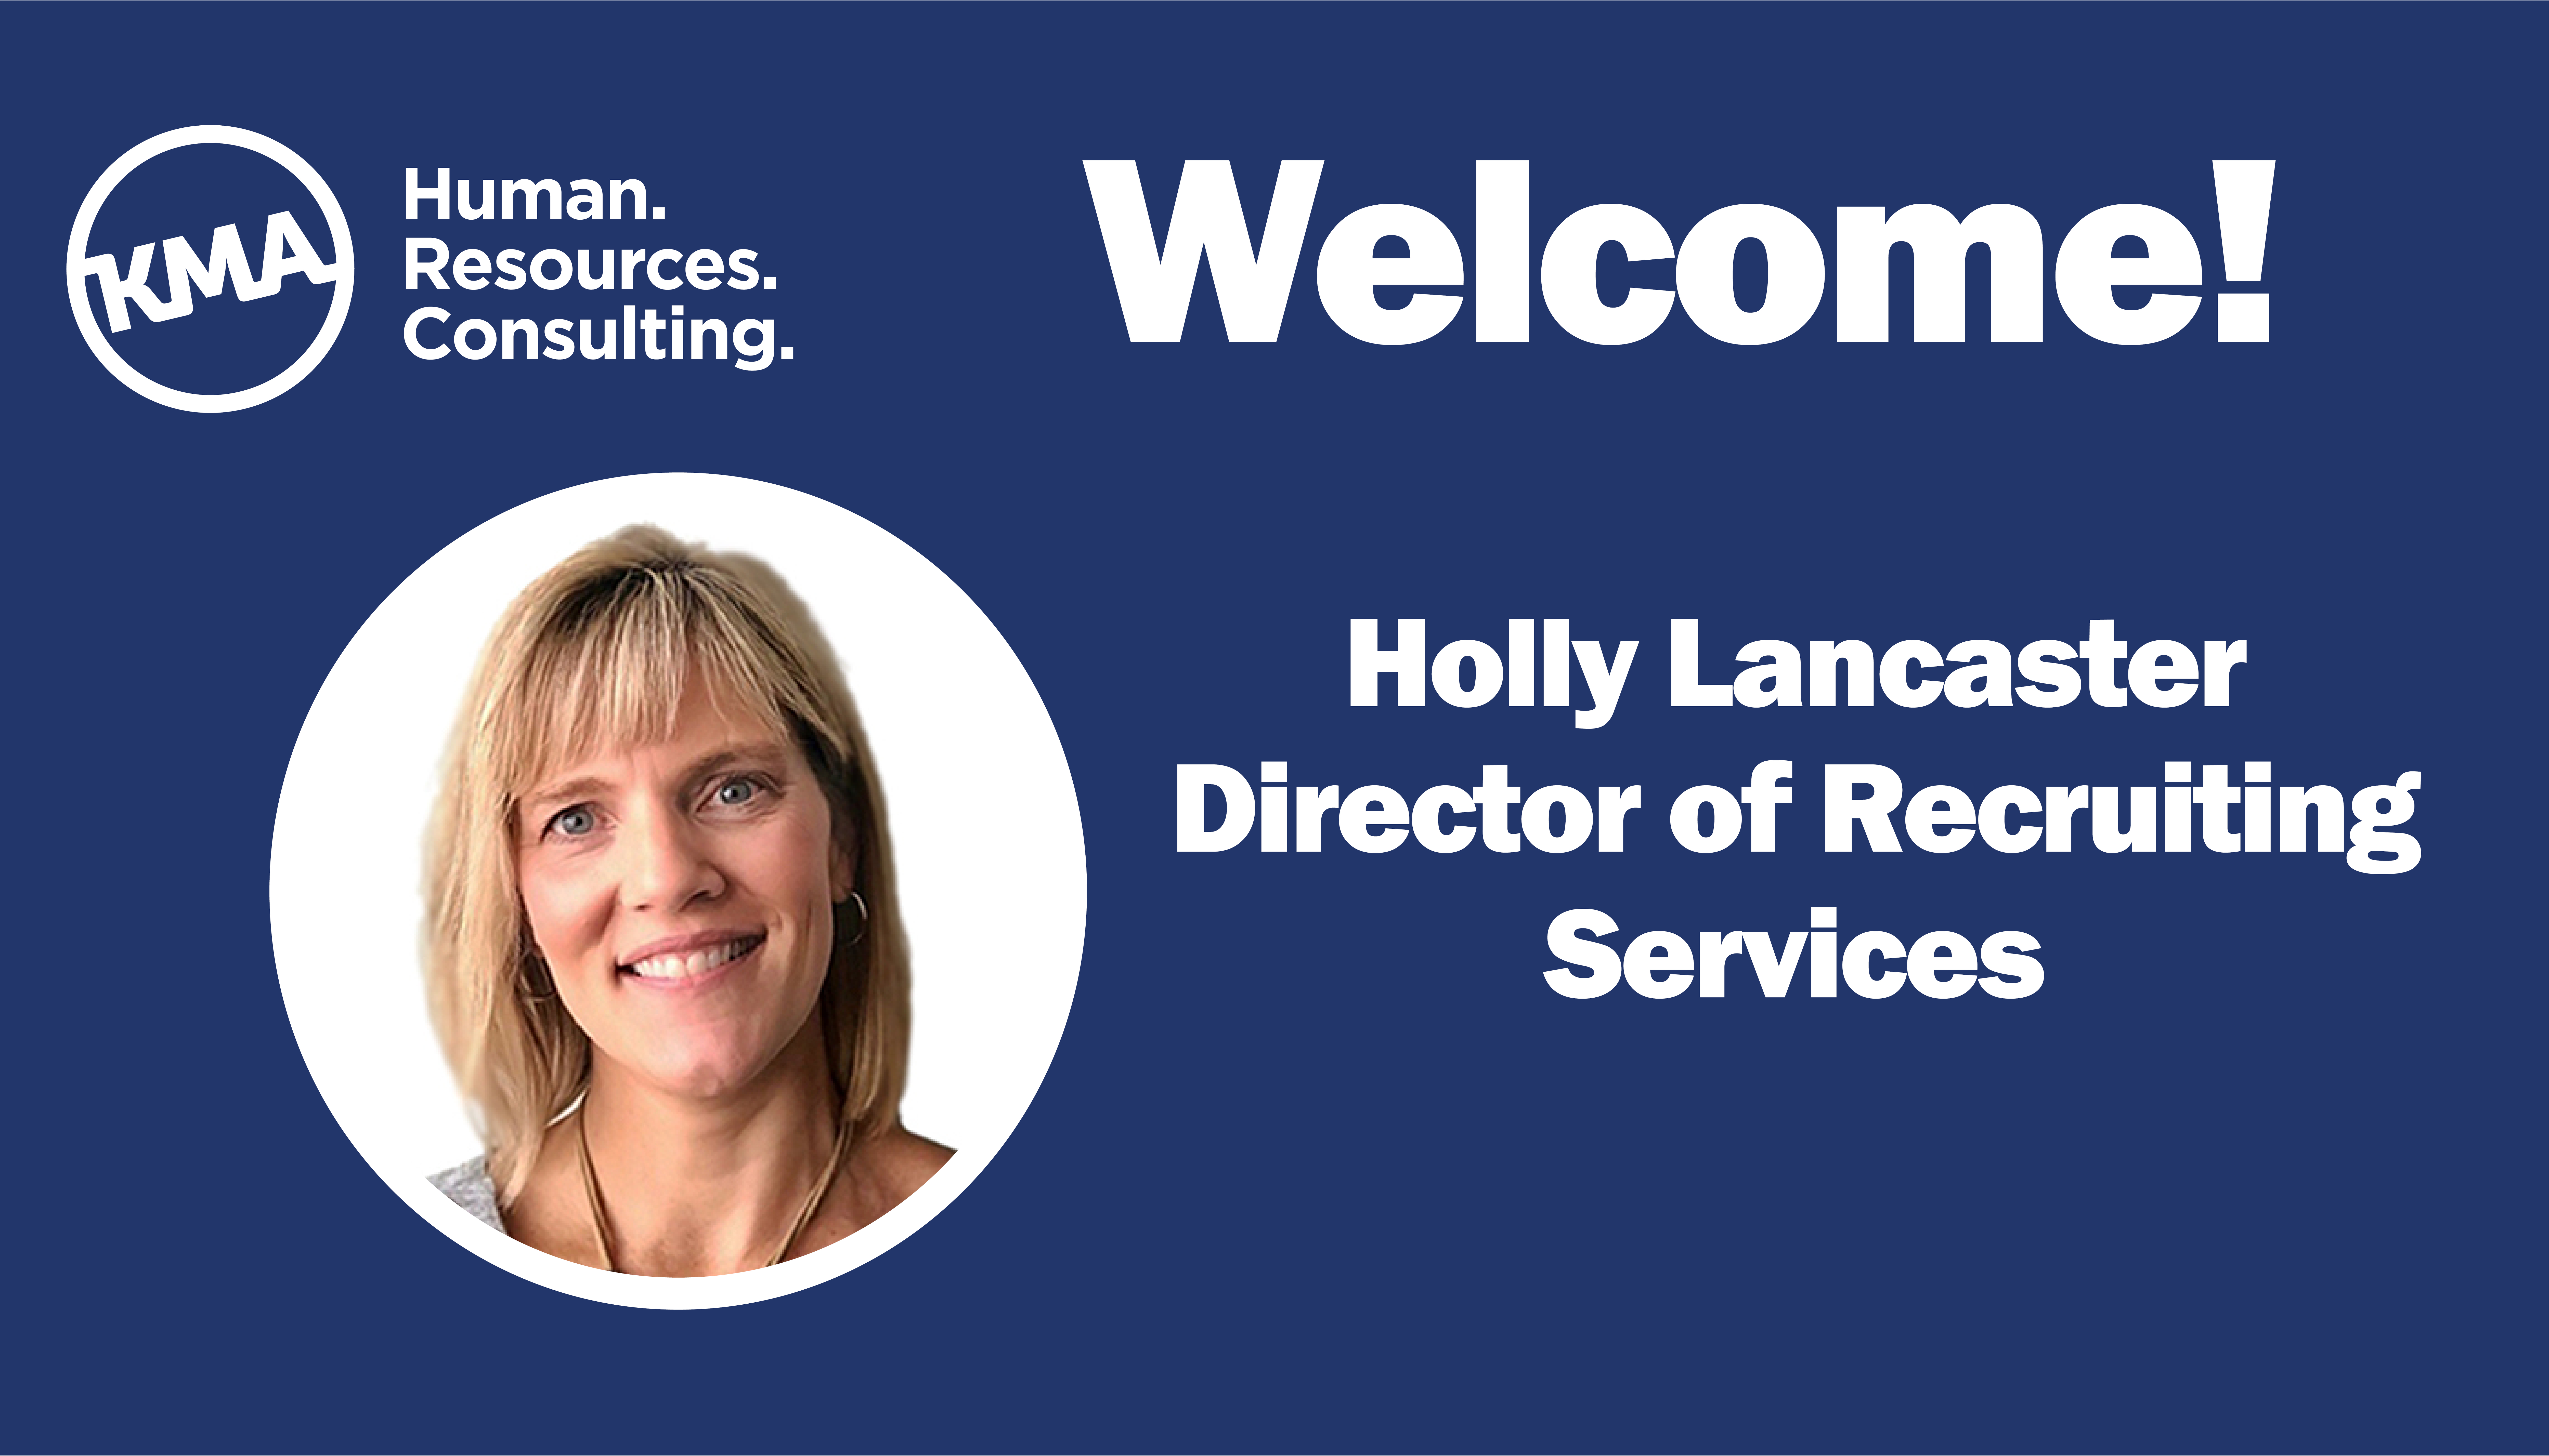 KMA is Pleased to Welcome Holly Lancaster as Recruiting Director